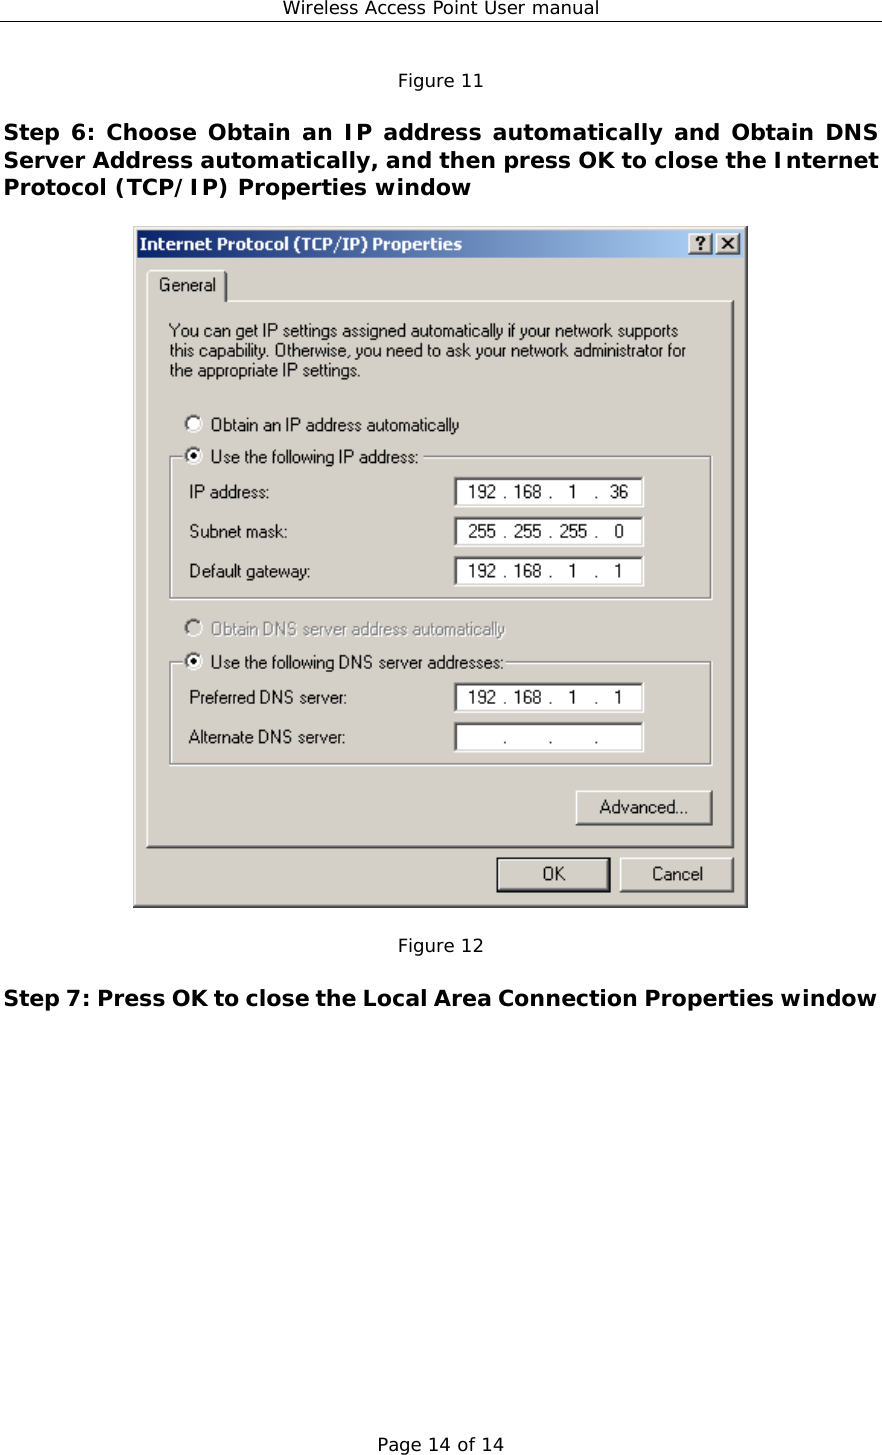 Wireless Access Point User manual Page 14 of 14 Figure 11  Step 6: Choose Obtain an IP address automatically and Obtain DNS Server Address automatically, and then press OK to close the Internet Protocol (TCP/IP) Properties window    Figure 12  Step 7: Press OK to close the Local Area Connection Properties window  